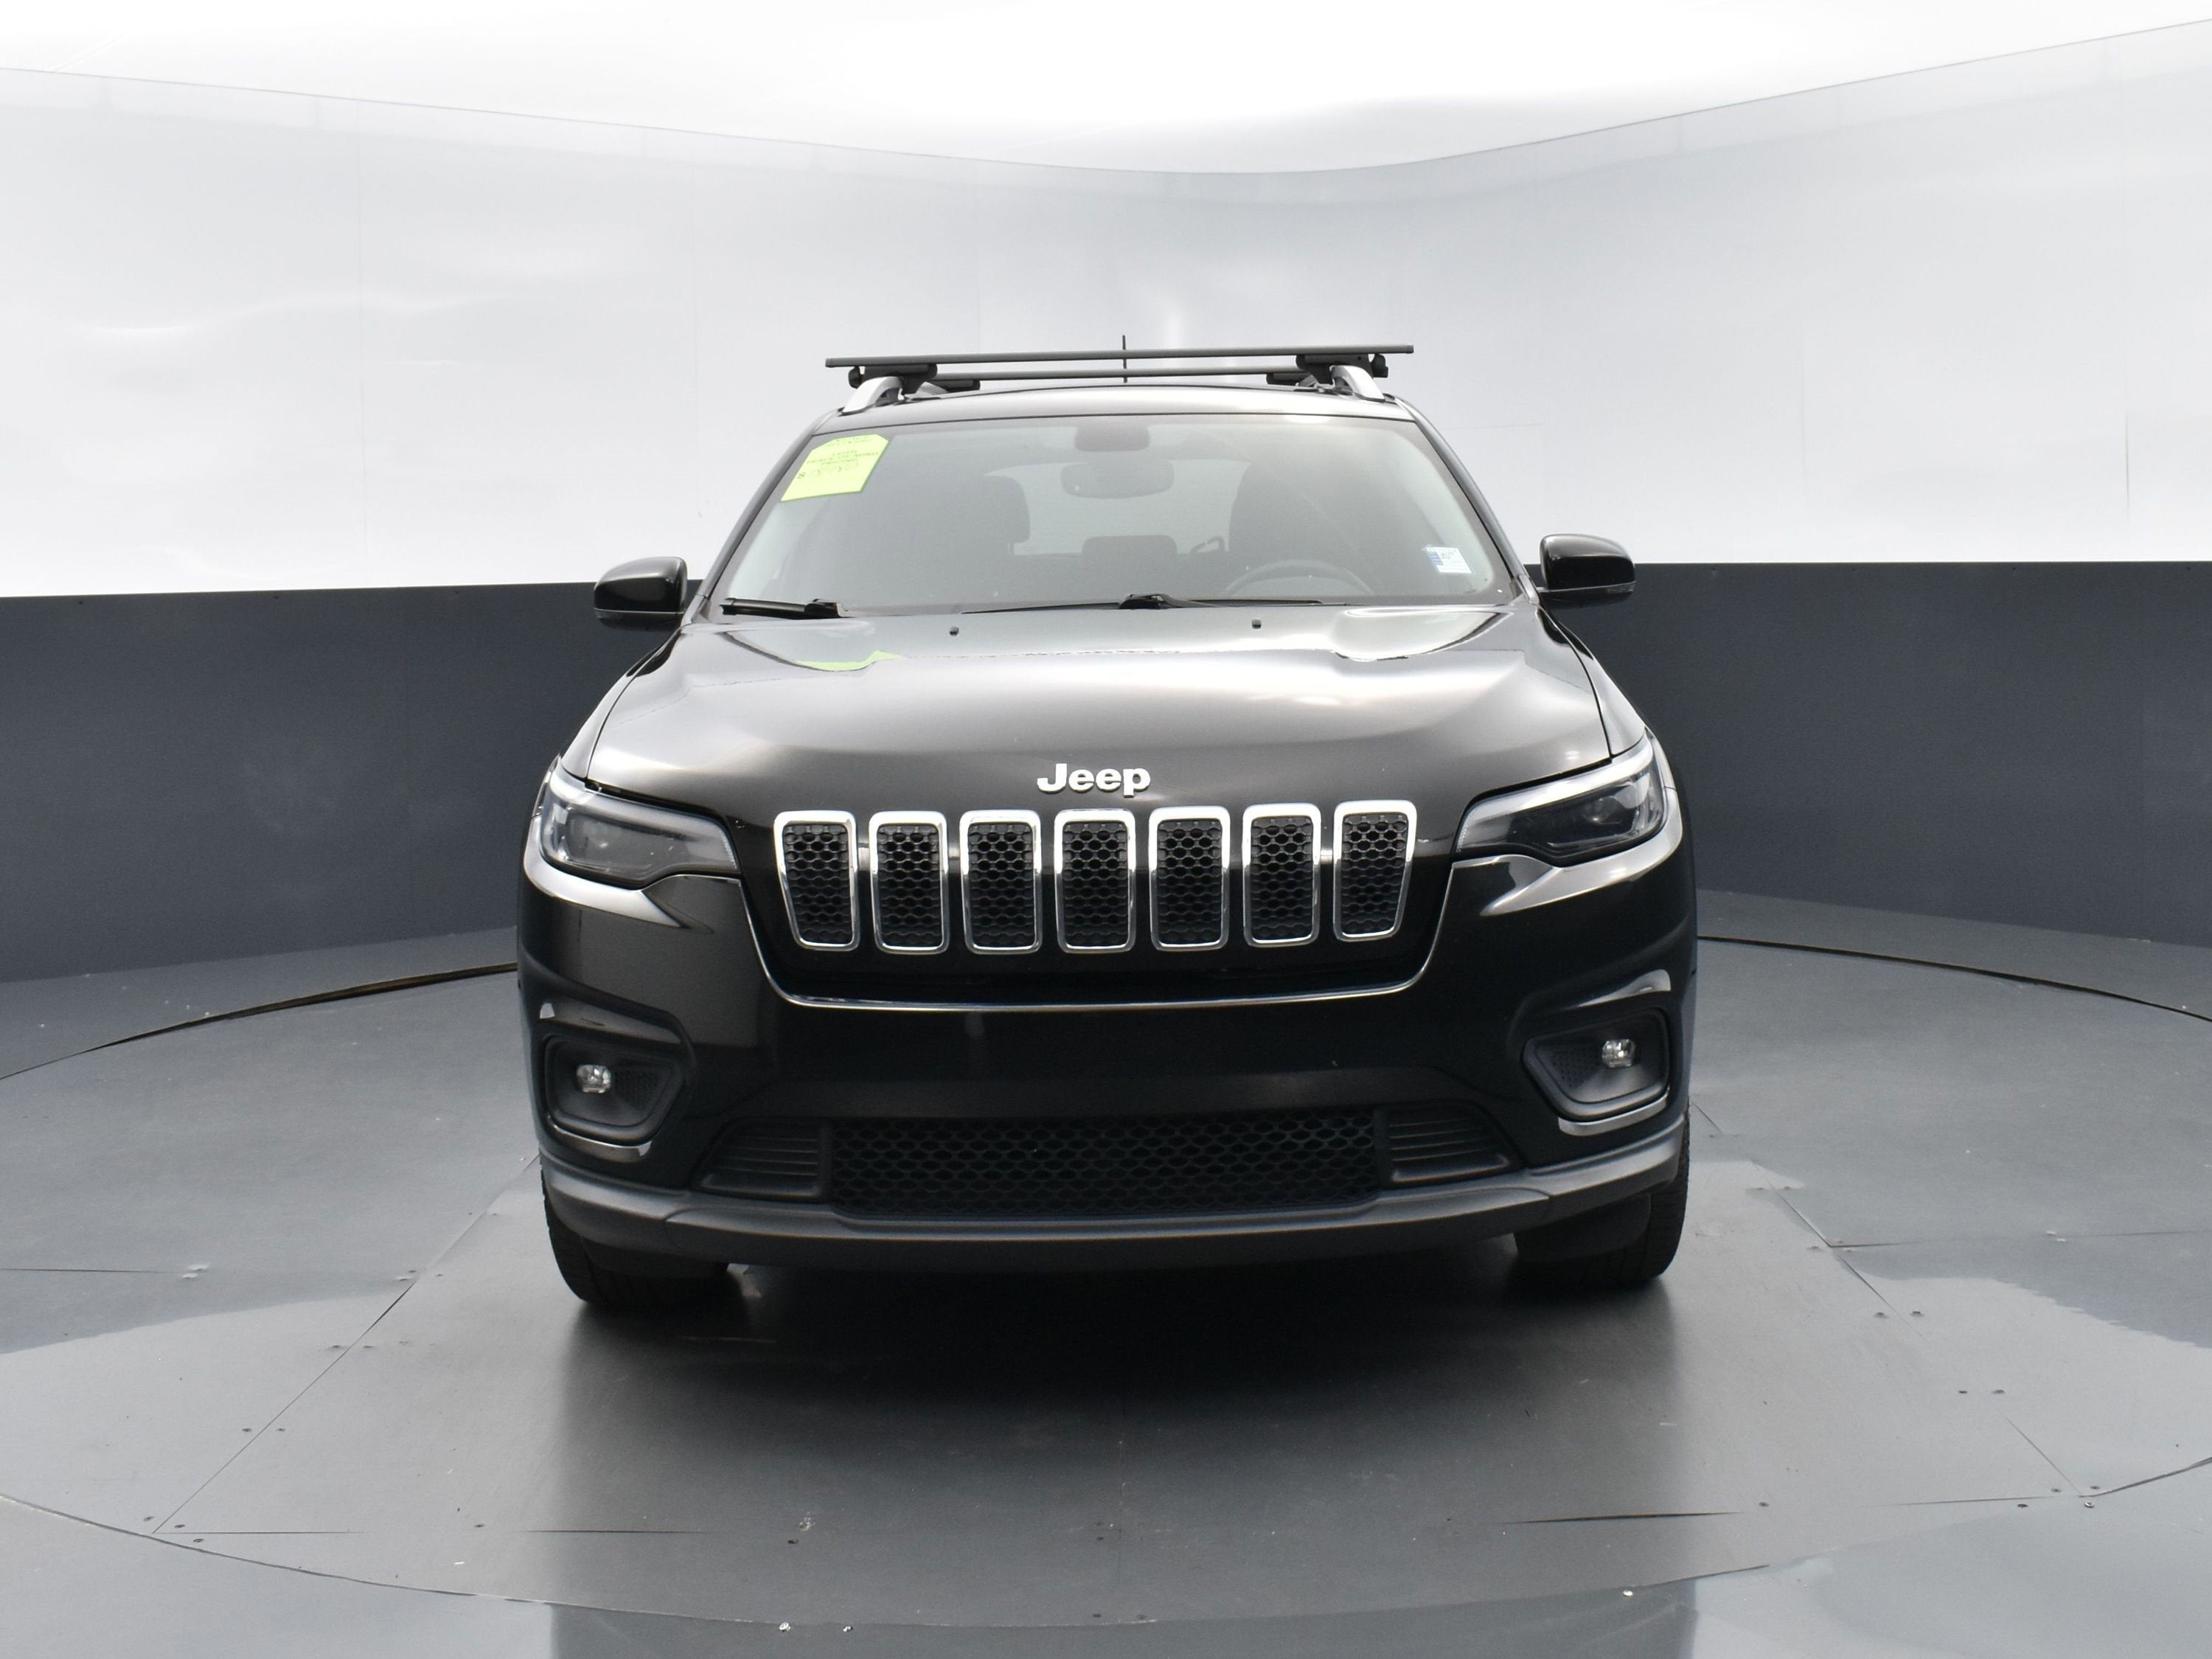 Used 2019 Jeep Cherokee Latitude Plus with VIN 1C4PJMLBXKD101252 for sale in Wendell, NC